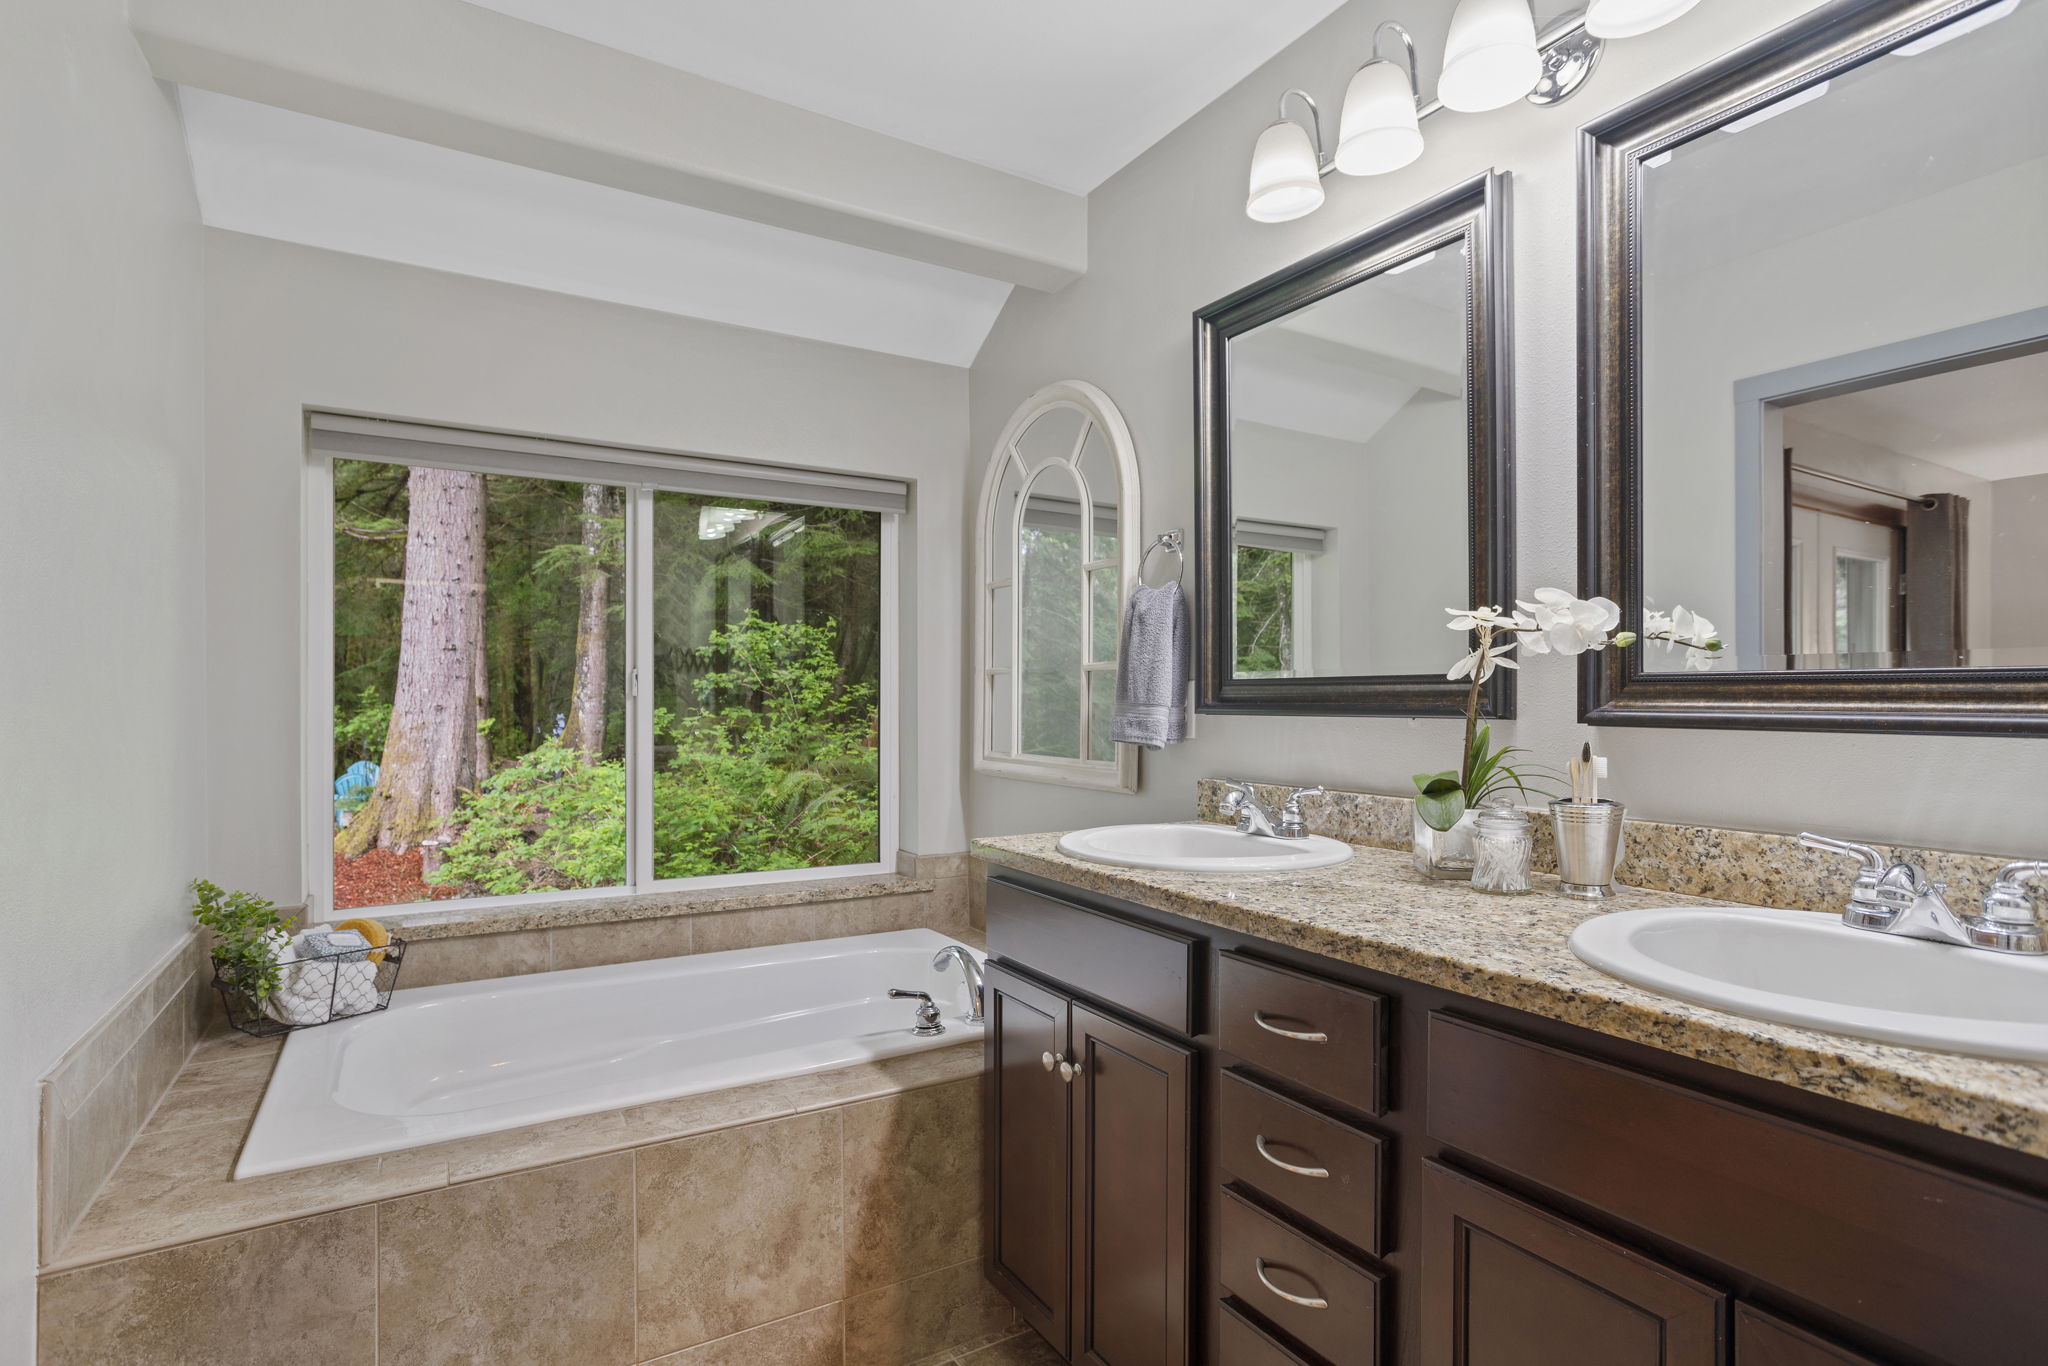 Primary ensuite boasts, large soaking tub and double sinks ......with a view!